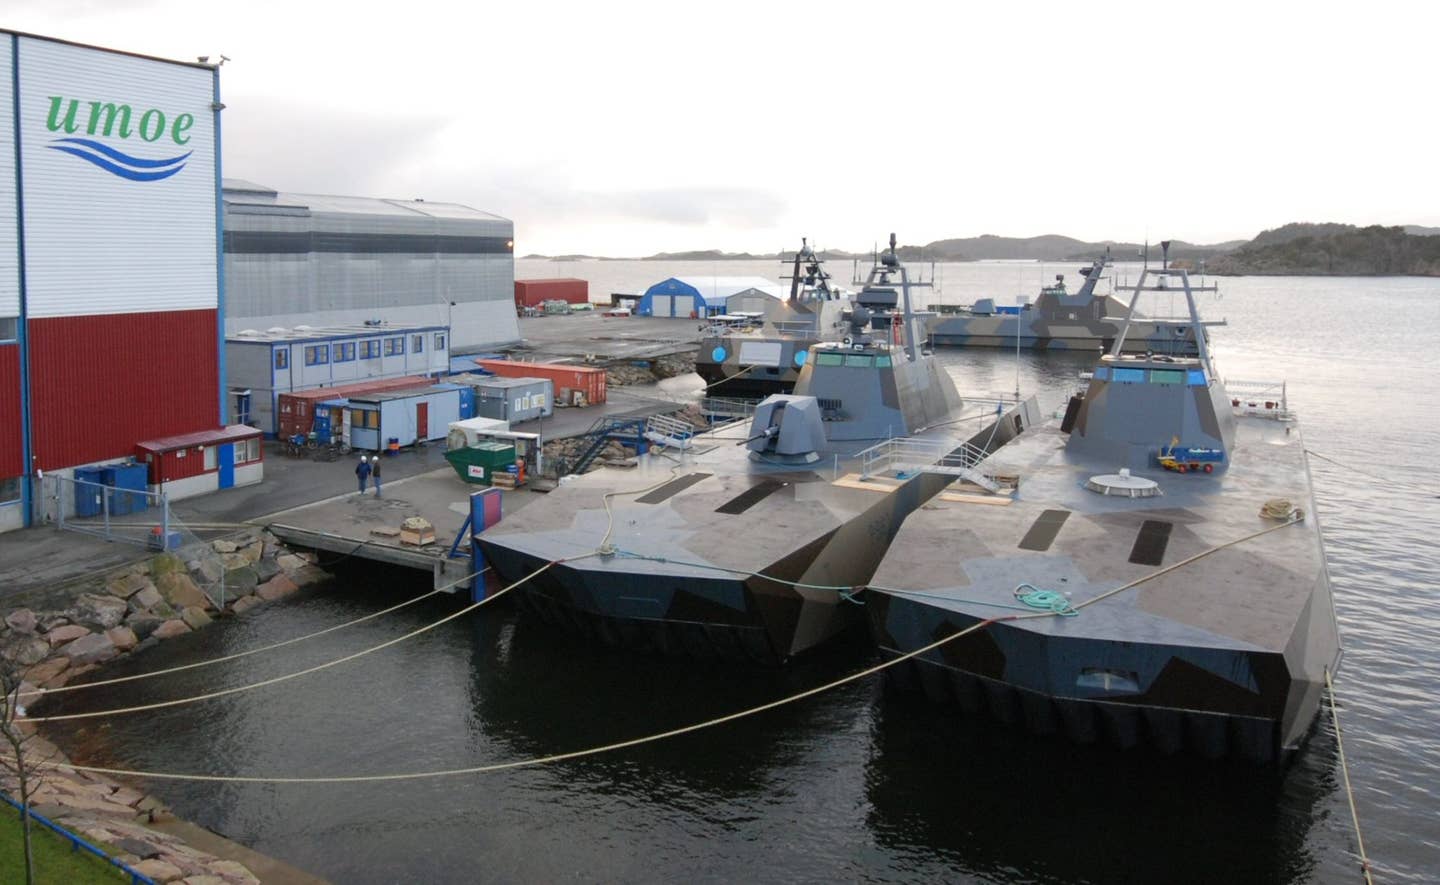 Four Skjold-class missile boats in the harbor. (Image from Wikimedia Commons)